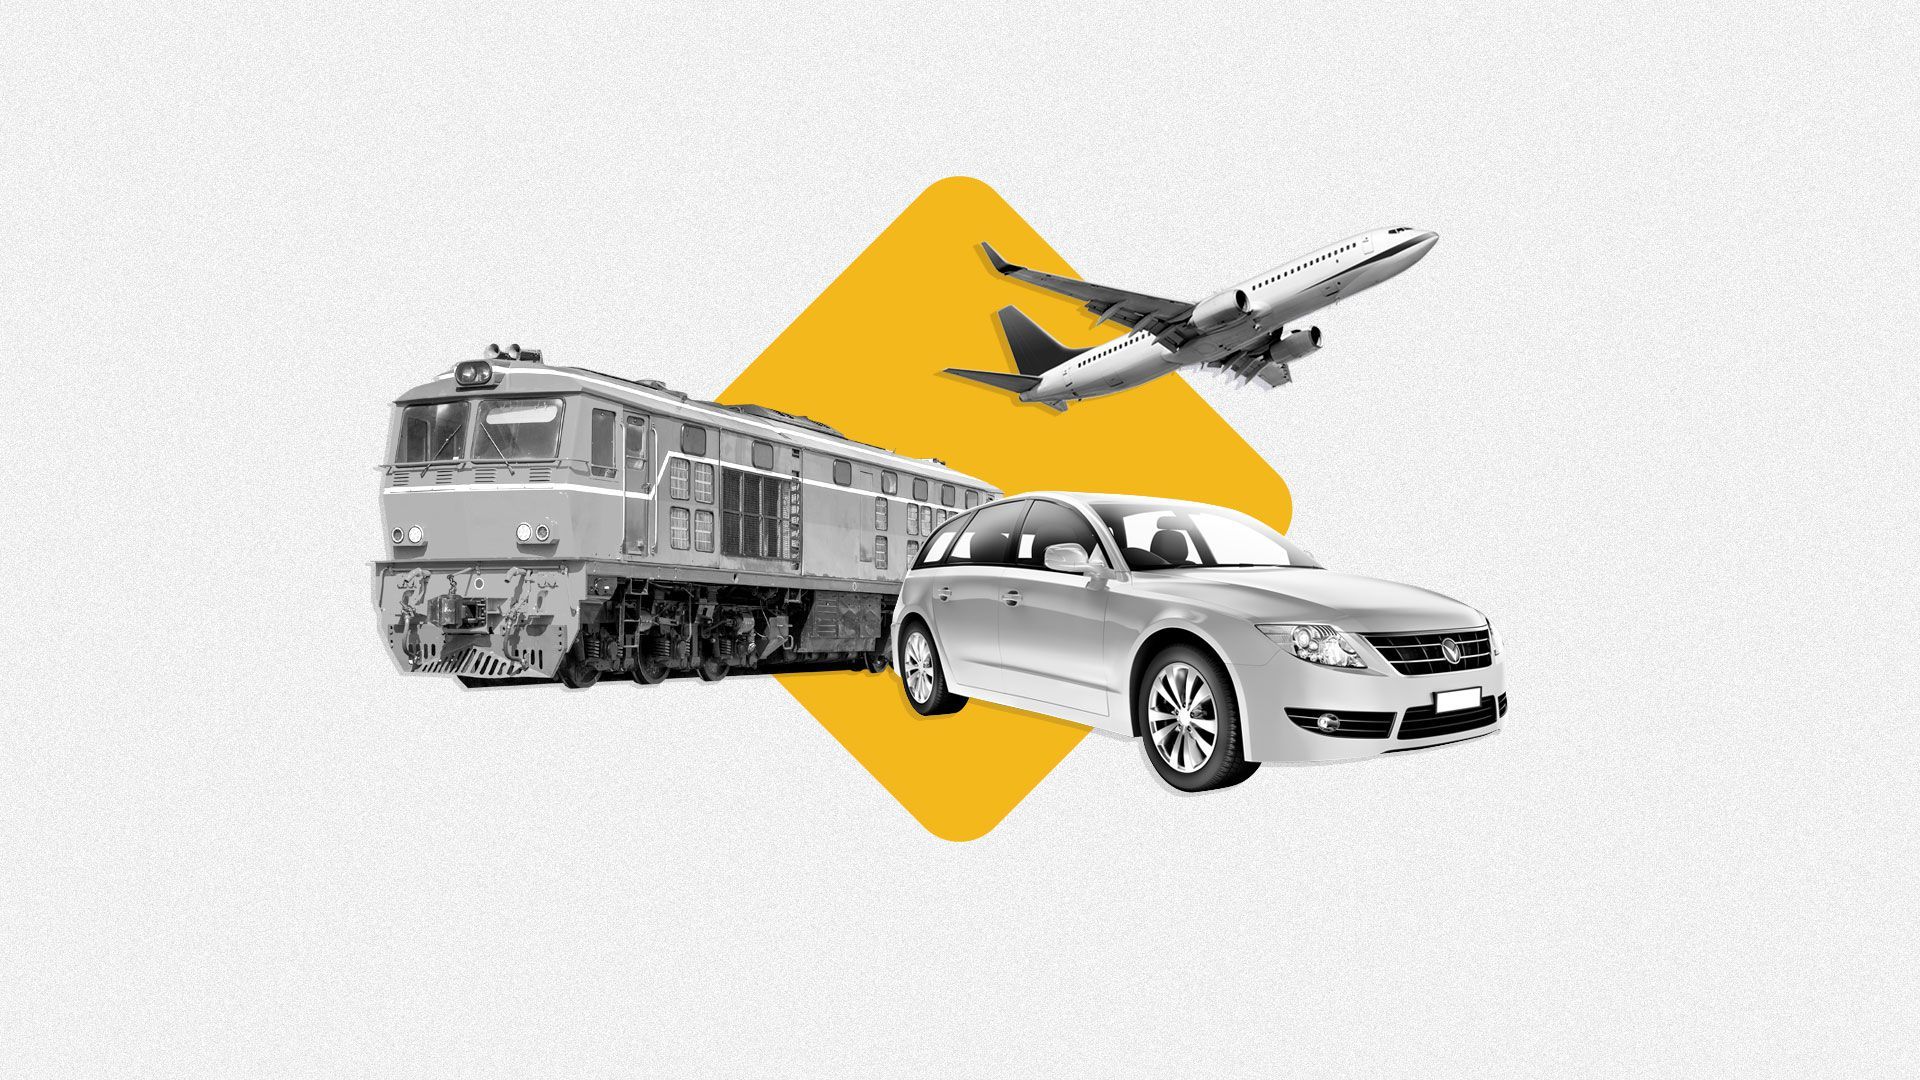 Photo illustration of train, plane, and a car. Caution sign behind the vehicles.